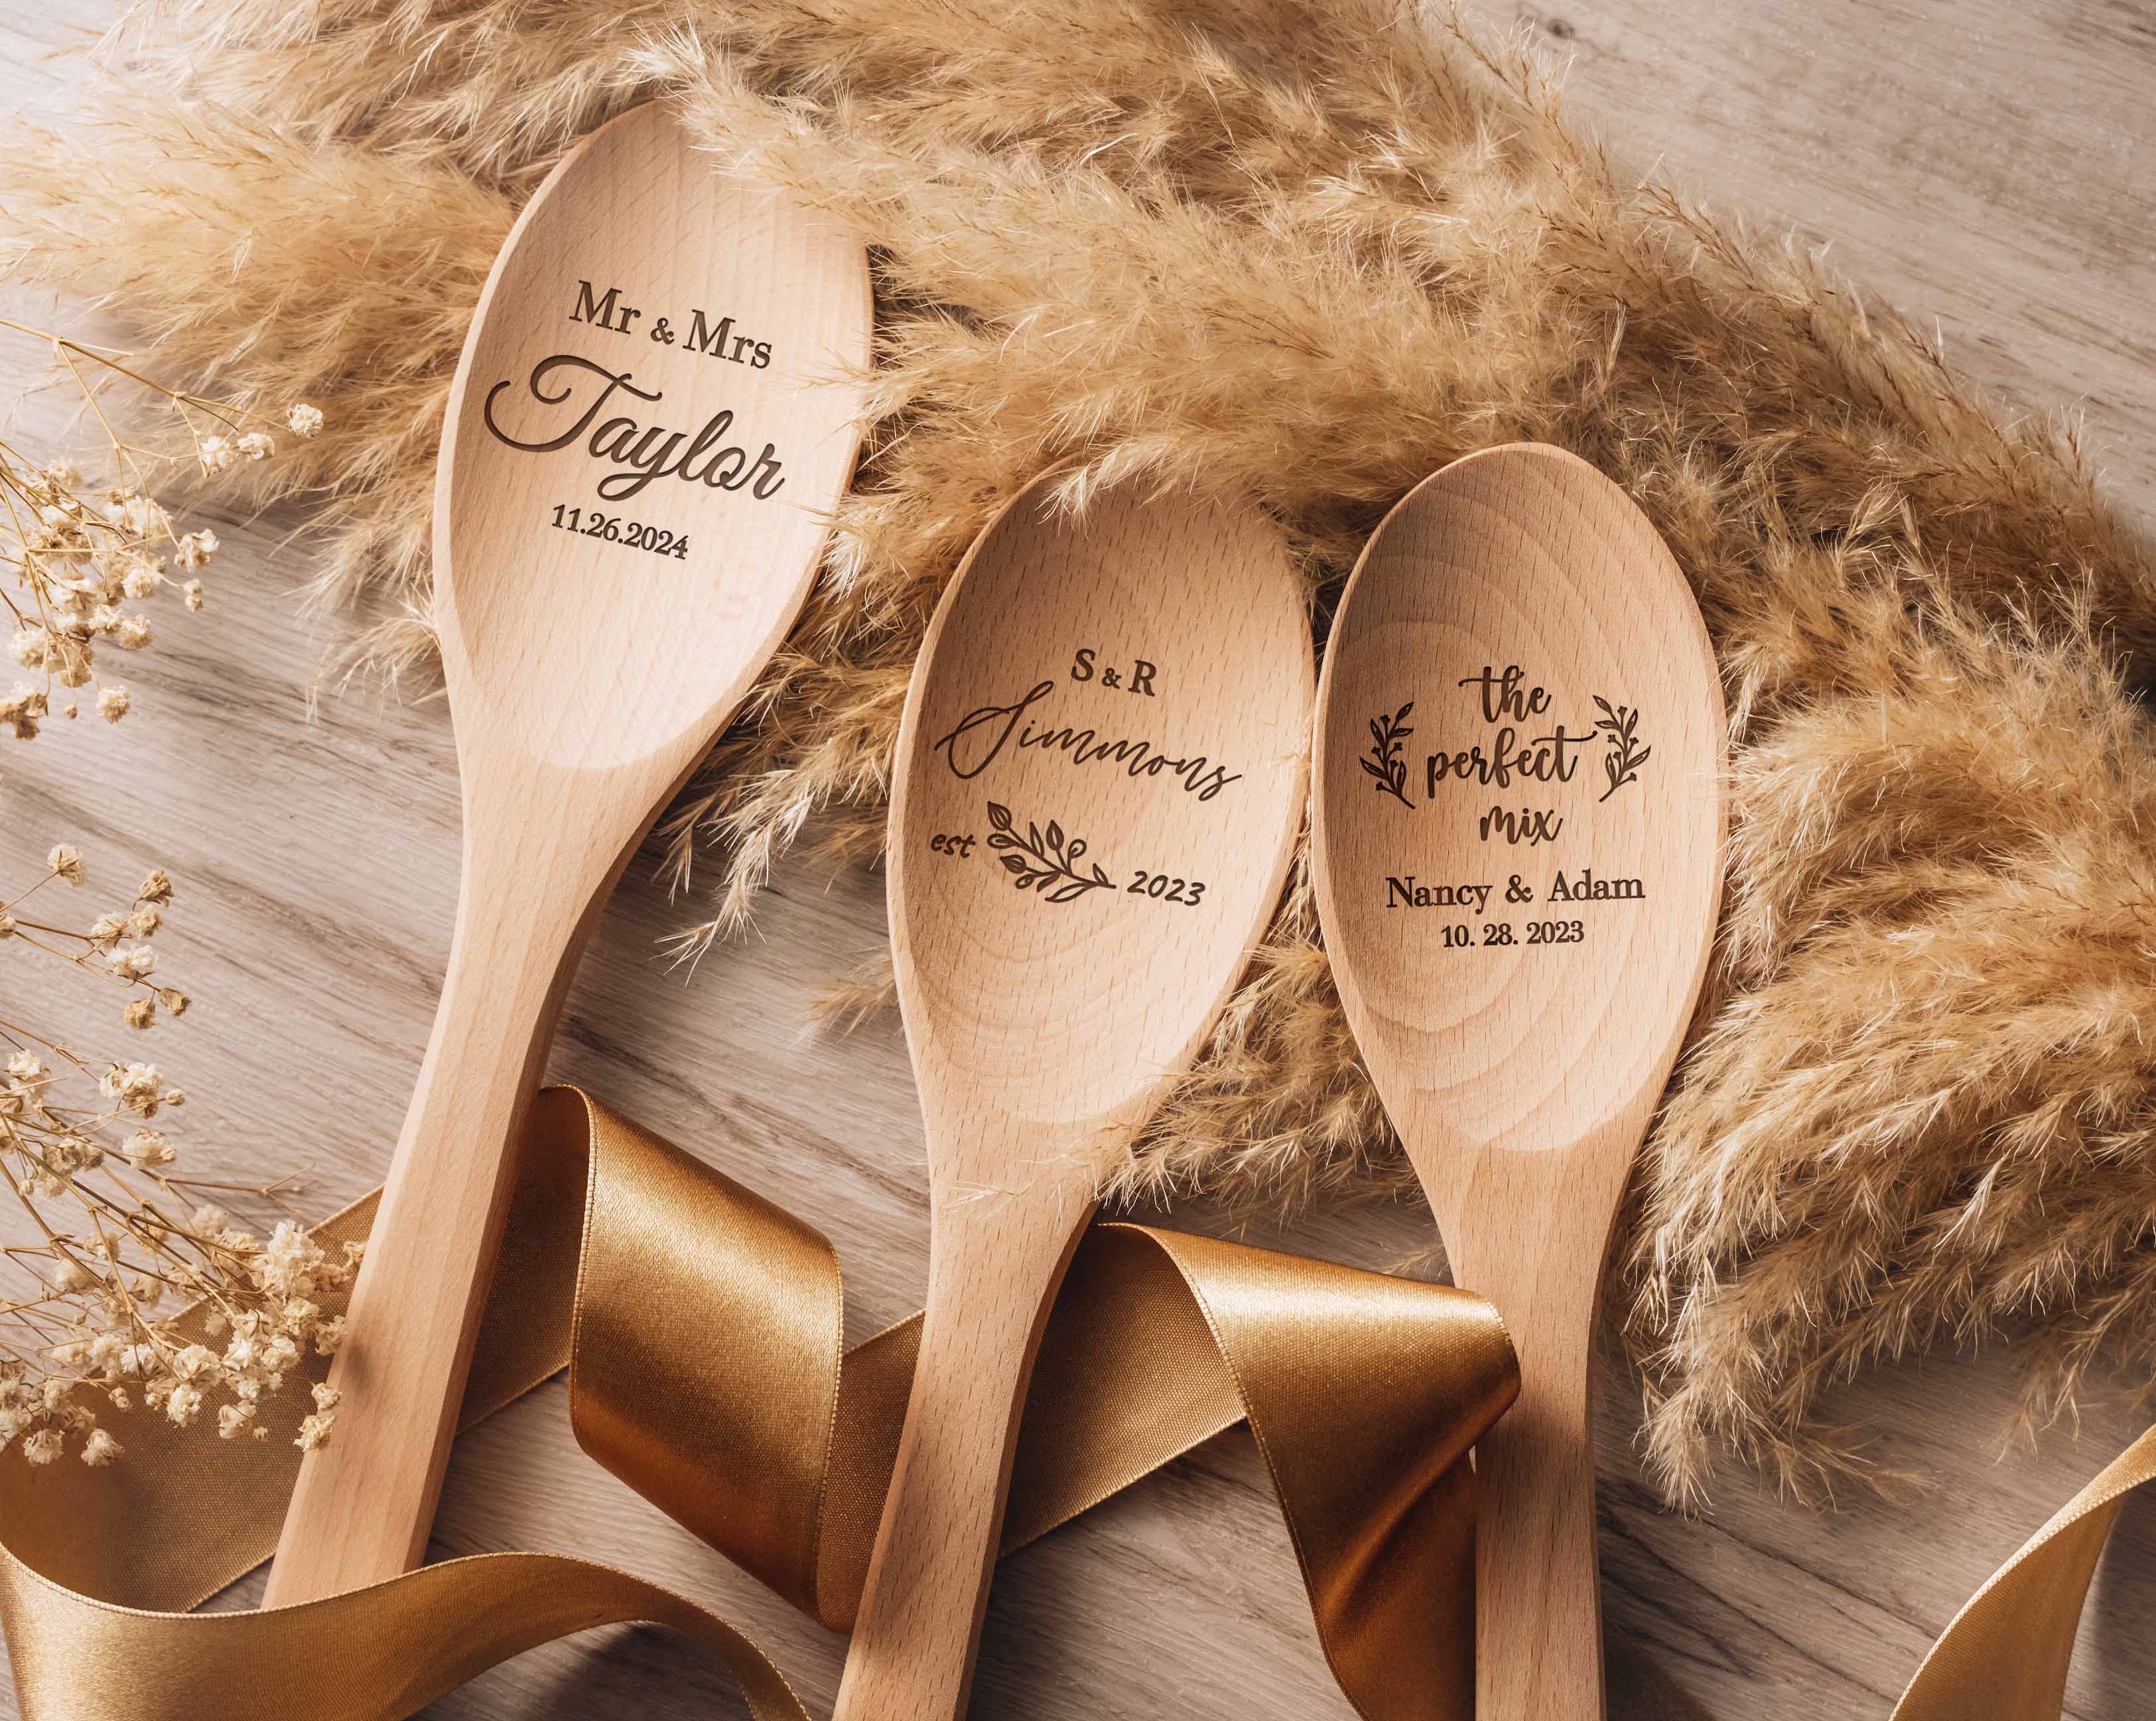 Personalized Engraved Wood Spoon with custom name and date, perfect for housewarming gift.